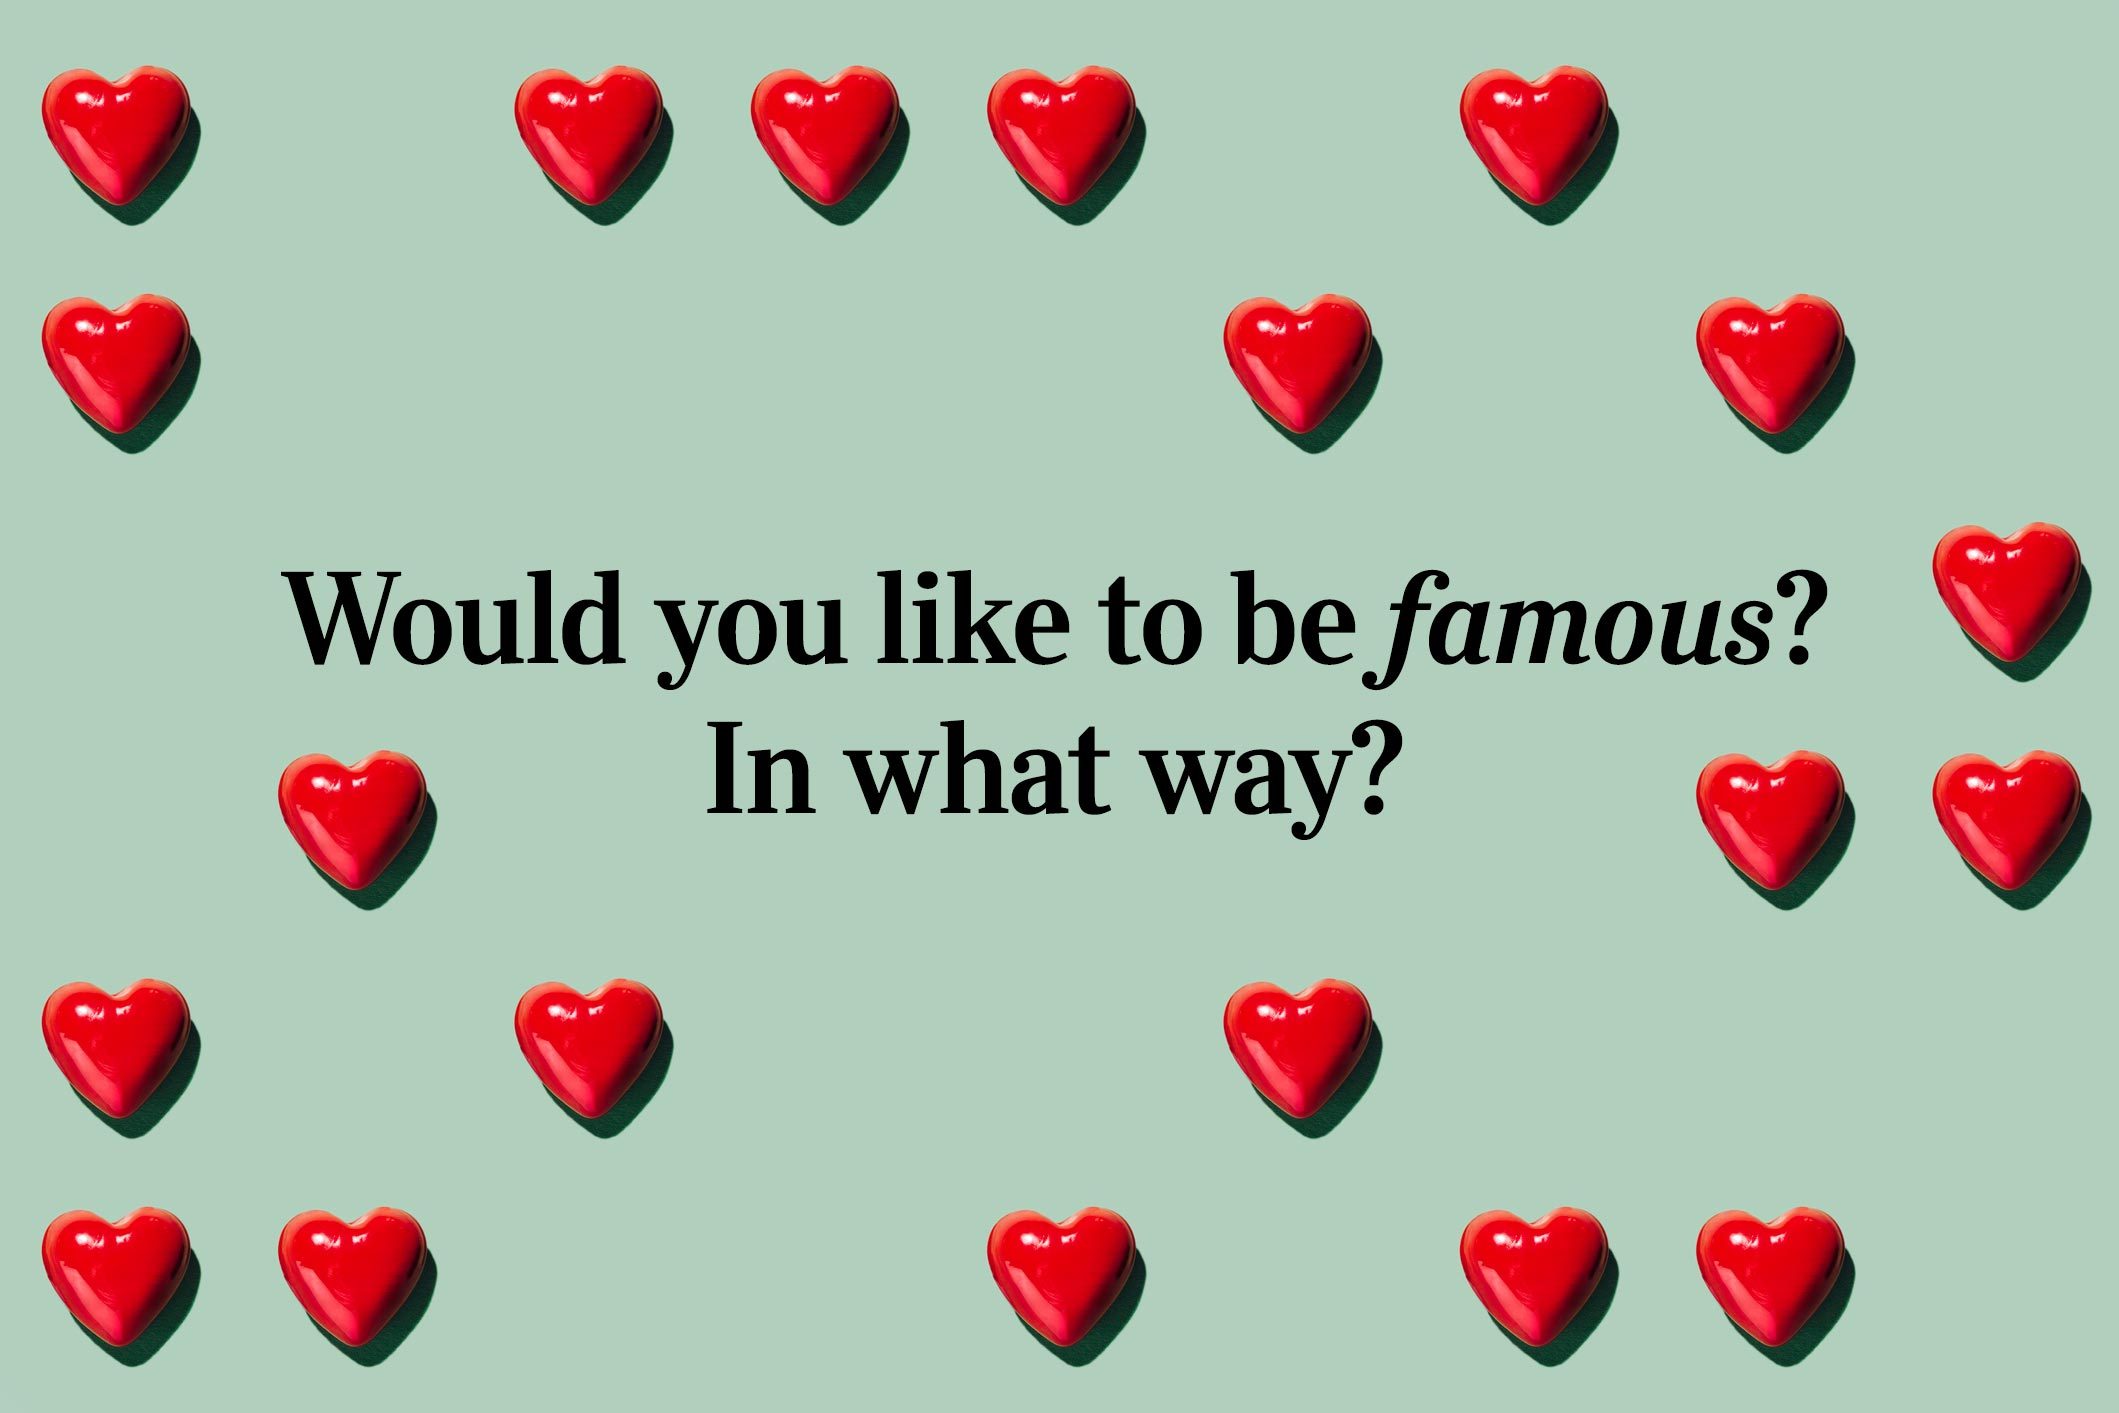 <p>Would you like to be famous? In what way?</p> <p>Don't forget to check out some of our favorite <a href="https://www.rd.com/article/quotes-from-famous-people/">quotes from famous people</a>, by the way.</p>